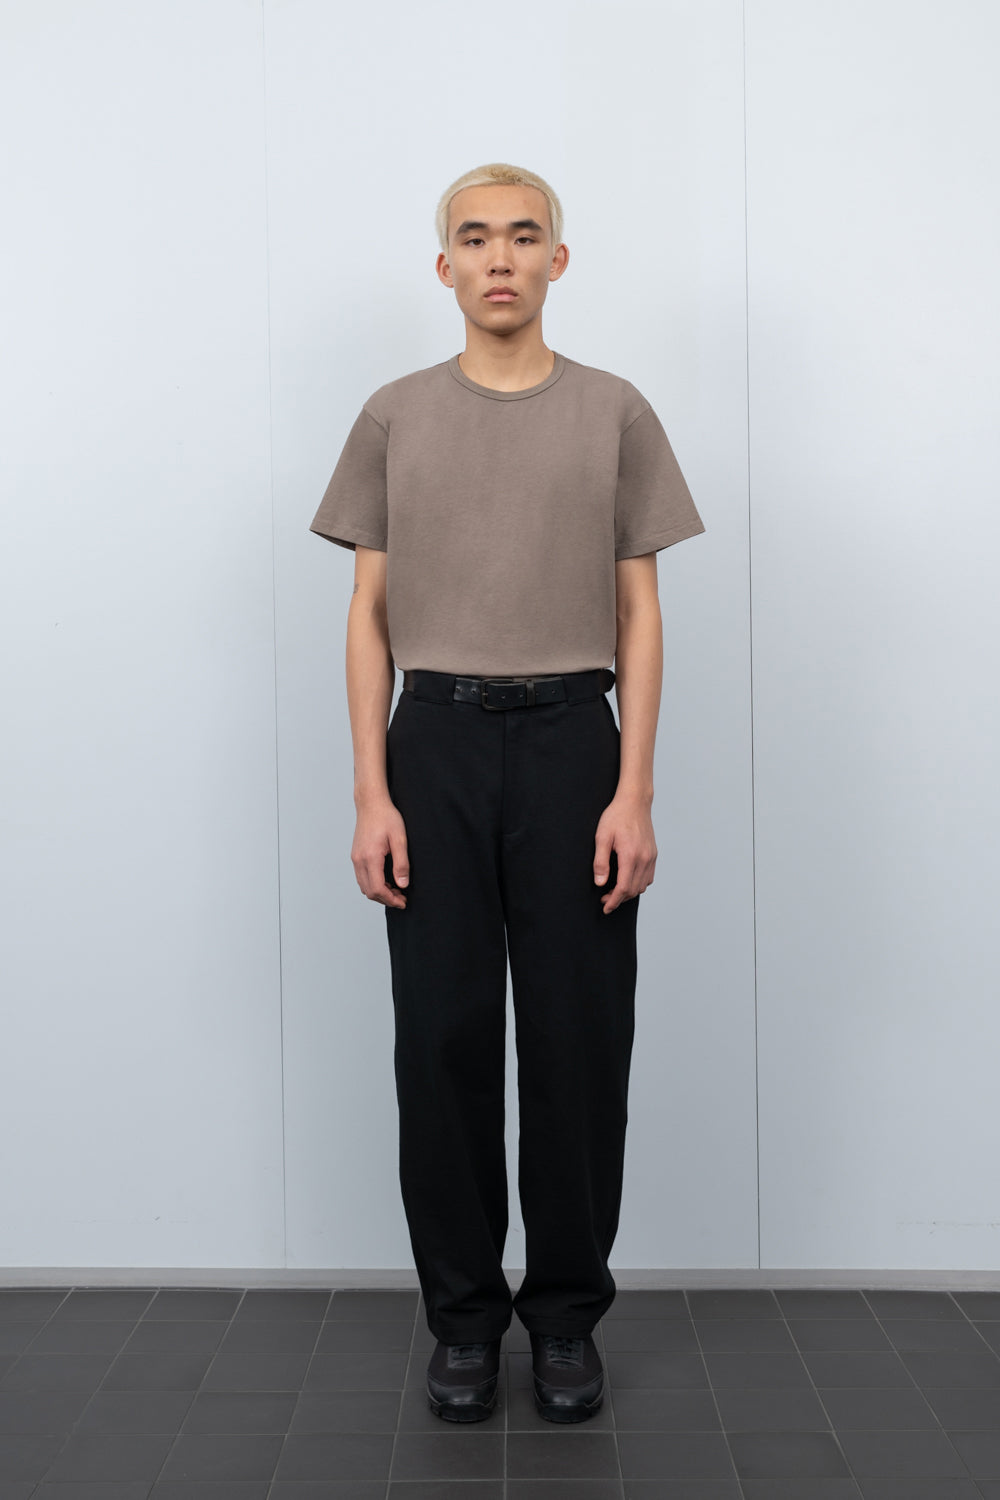 Olive Trousers with White T-Shirt | Hockerty